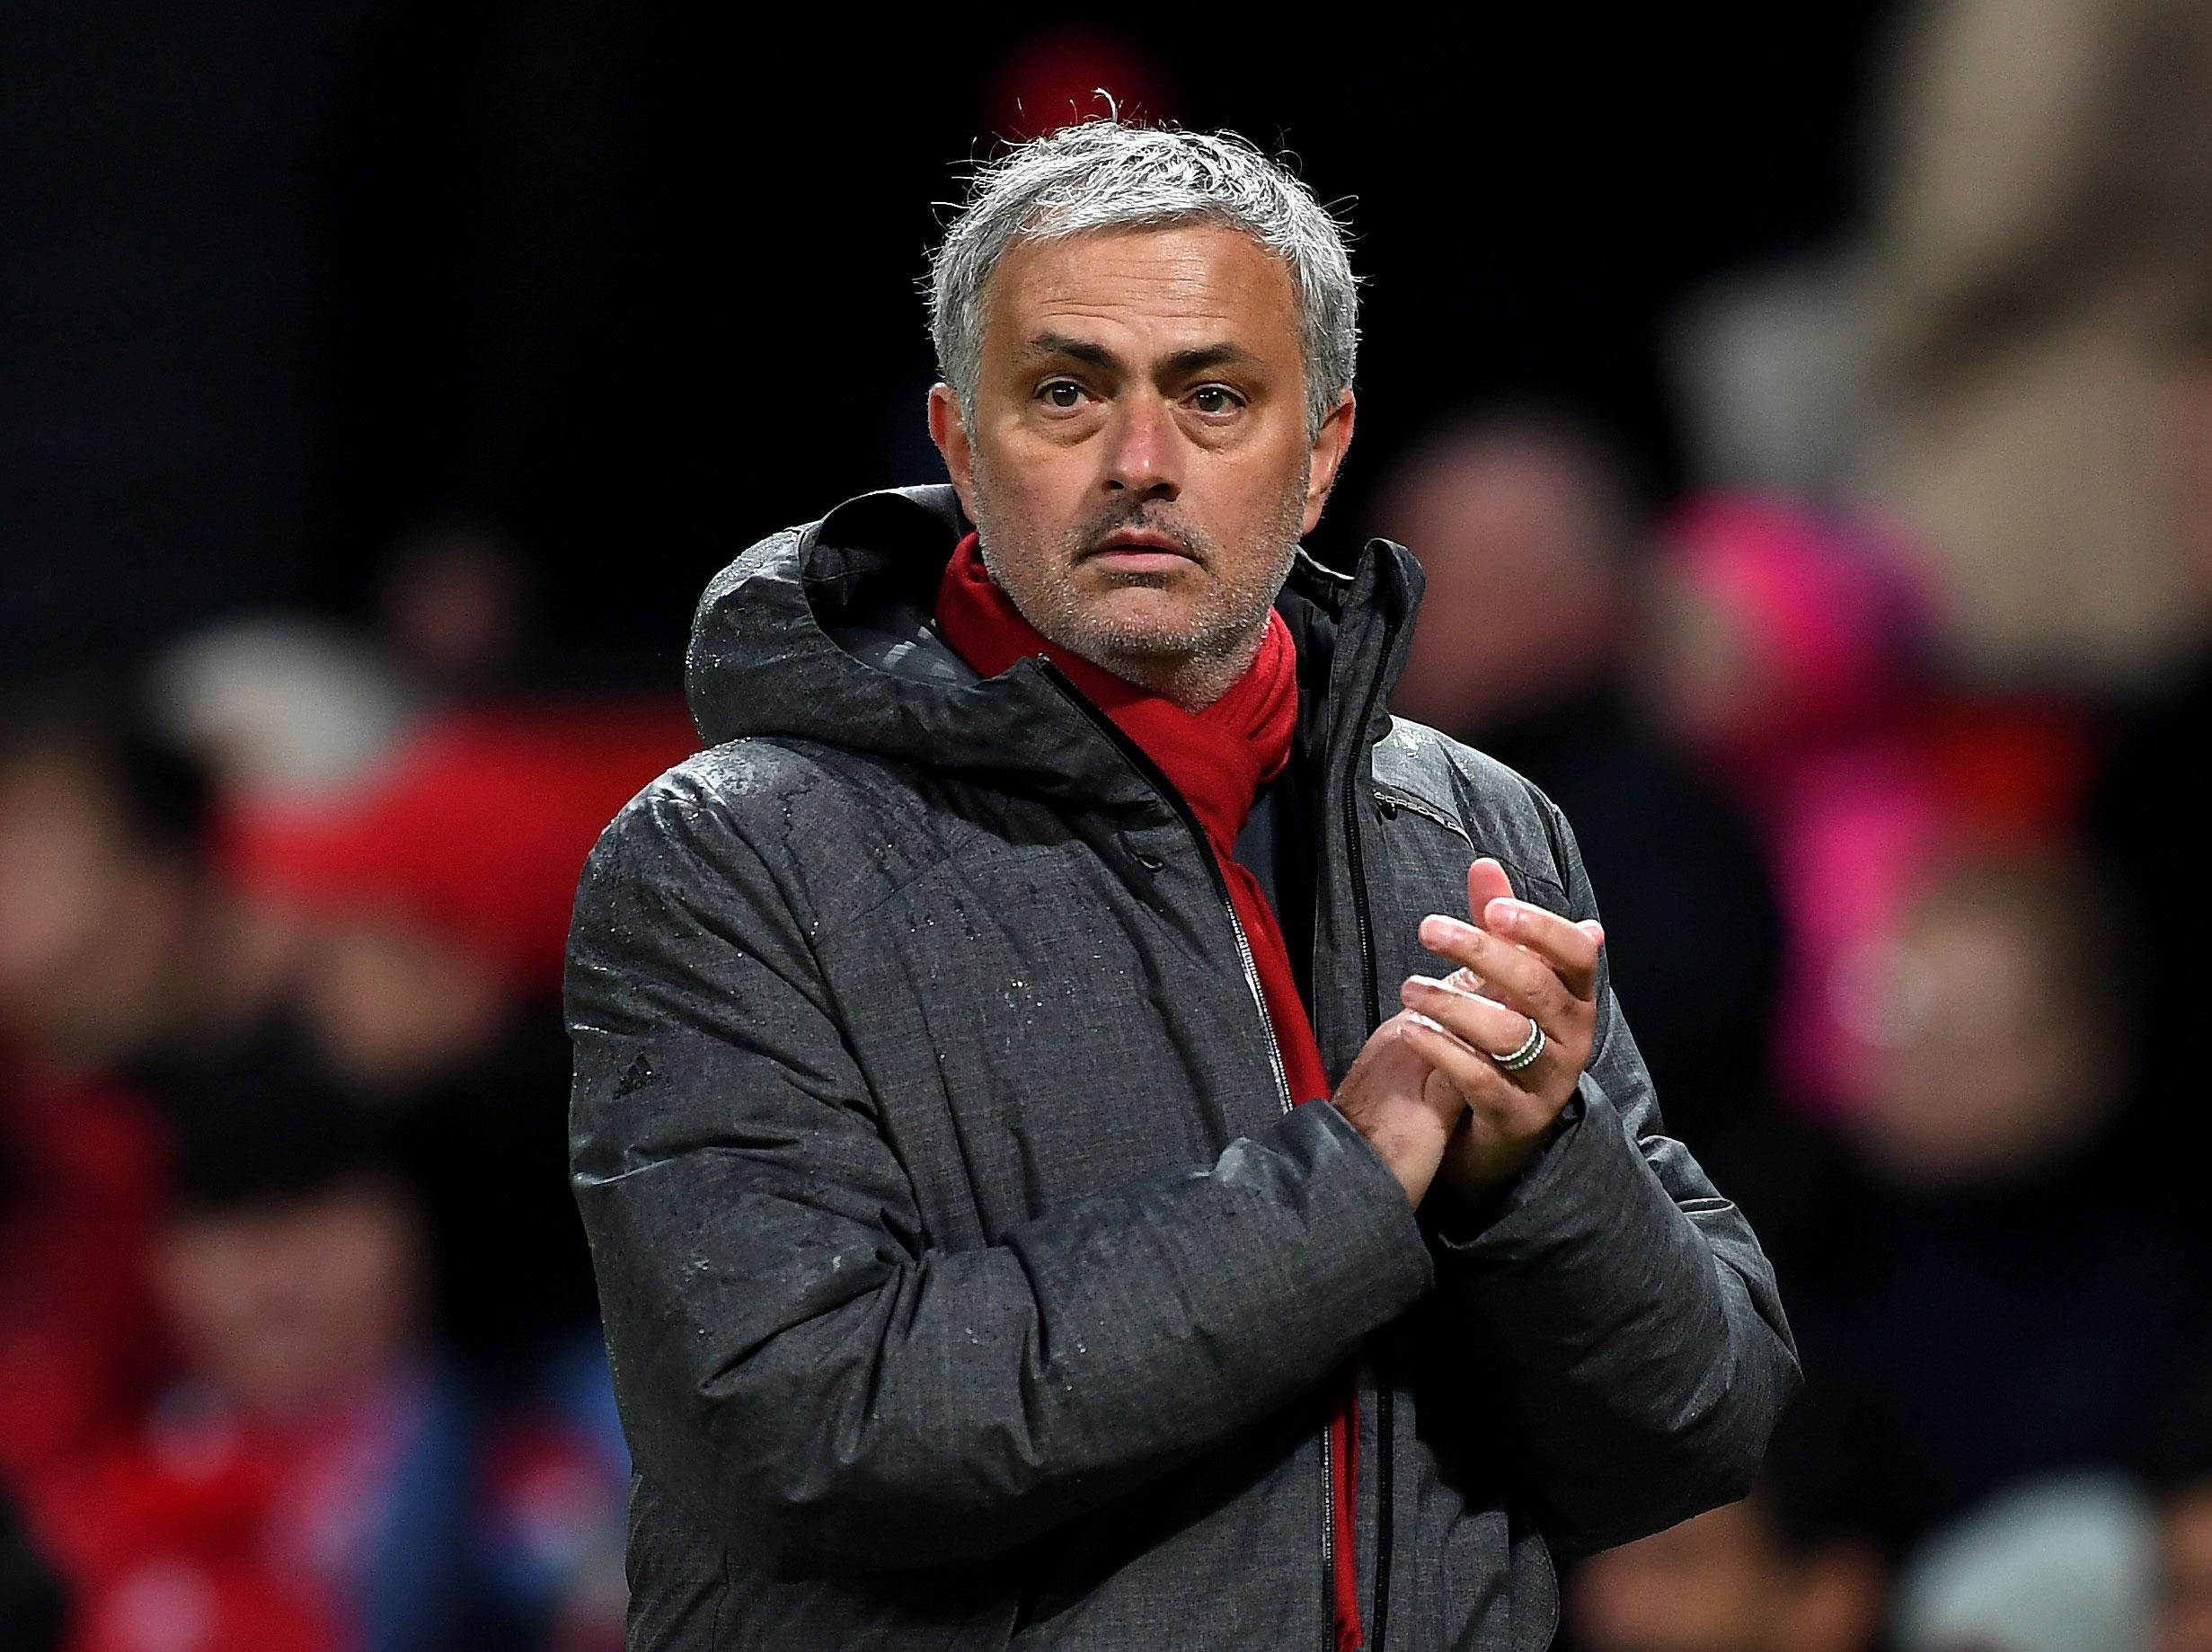 Jose Mourinho was happier with his side's second half display than their first